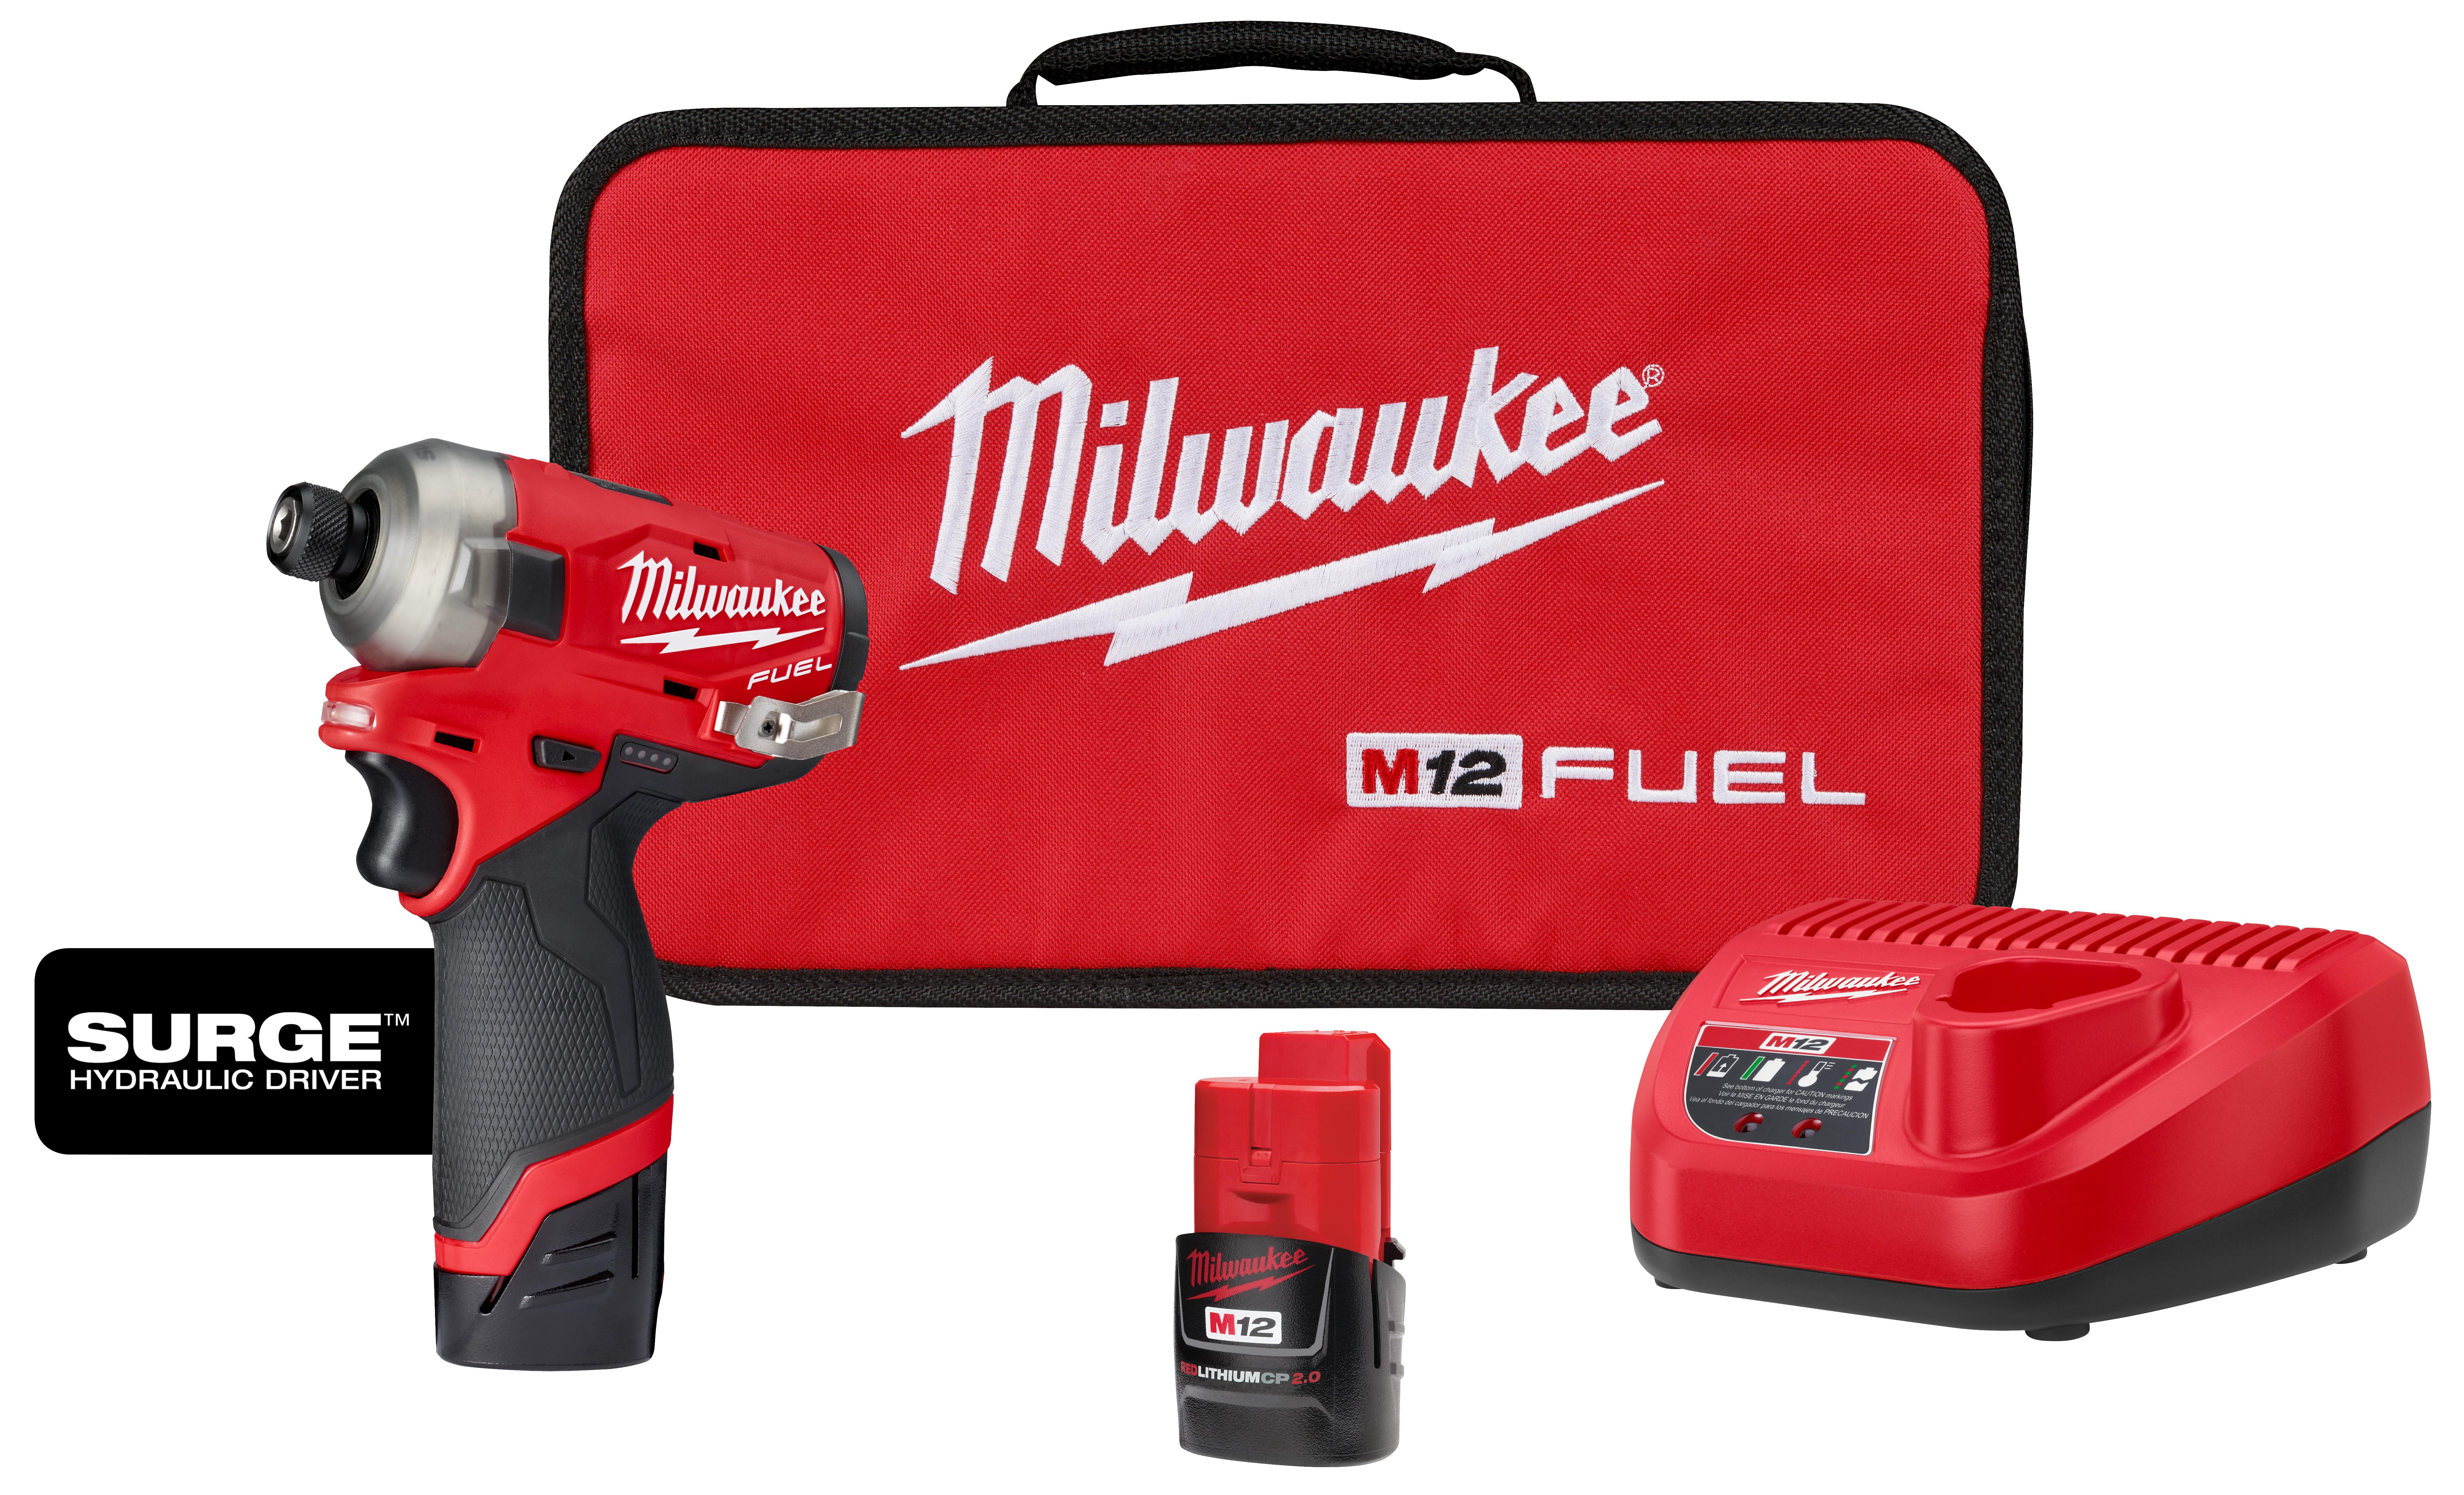 Milwaukee® M12 FUEL™ SURGE™ 2551-20 Cordless Hydraulic Driver, 1/4 in Hex Drive, 3400 bpm, 450 in-lb Torque, 12 V, 5.2 in OAL